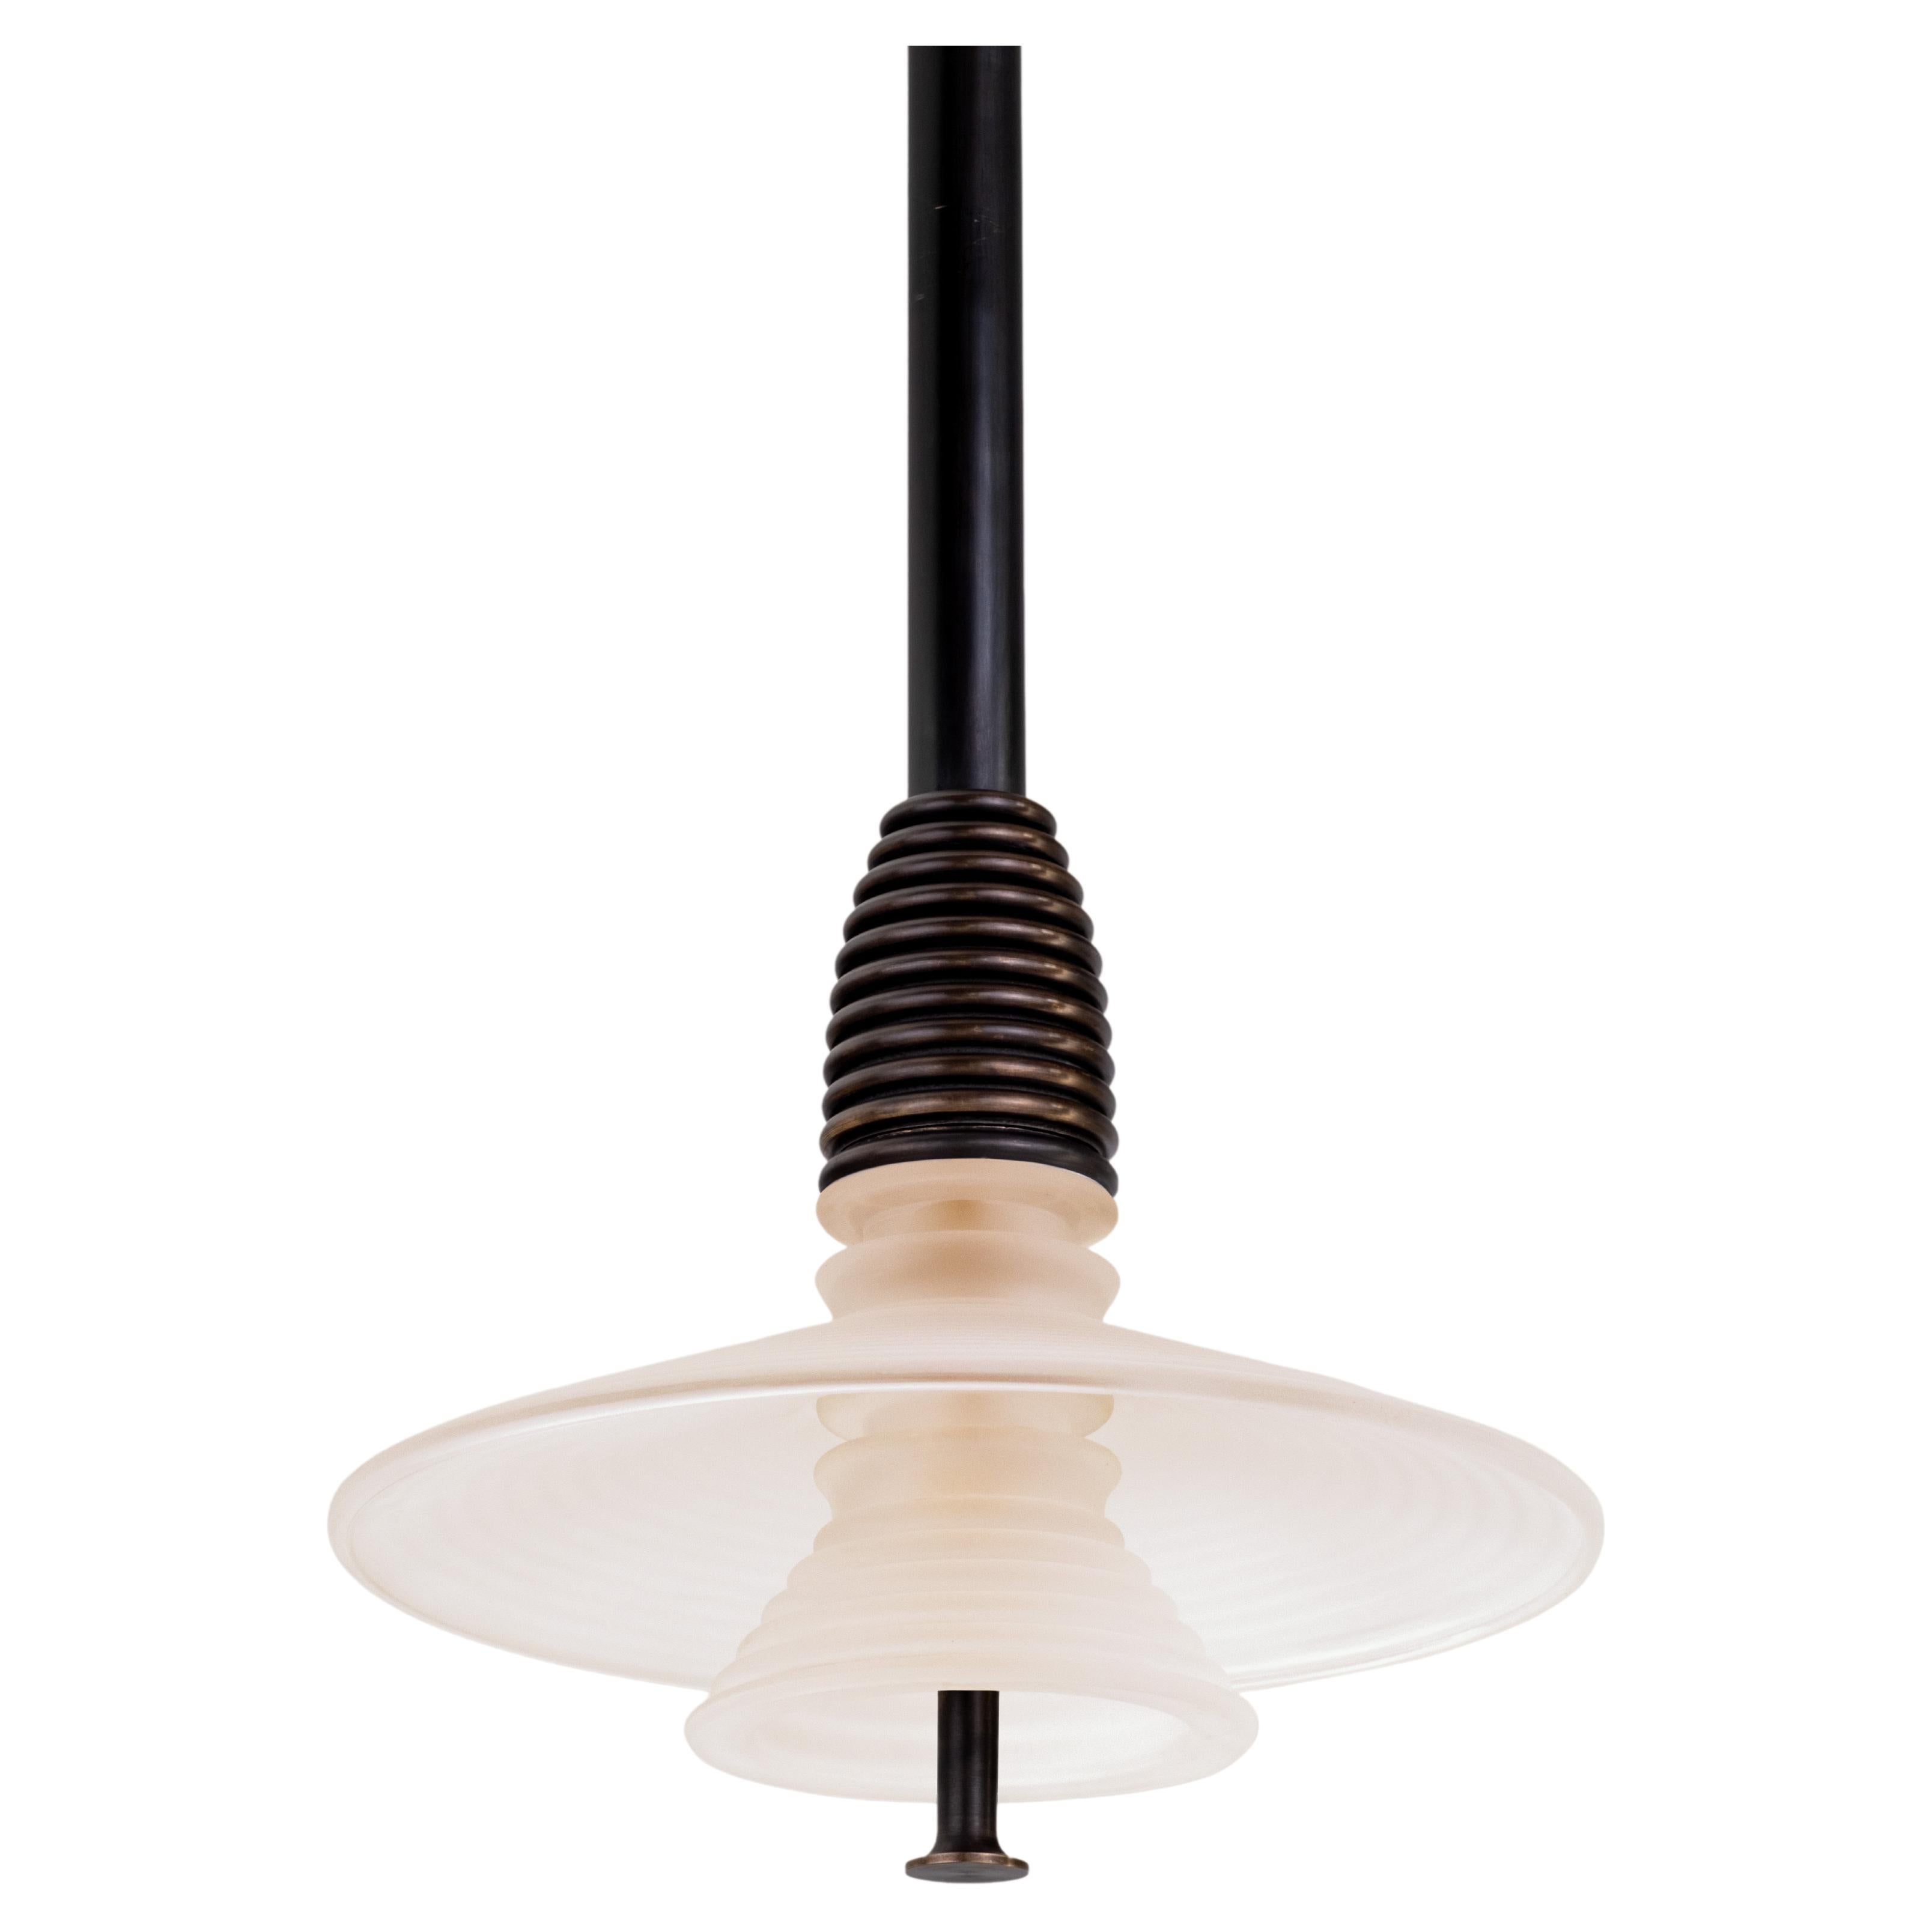 The Insulator 'AB' Pendant in dark brass and frosted glass by NOVOCASTRIAN deco For Sale